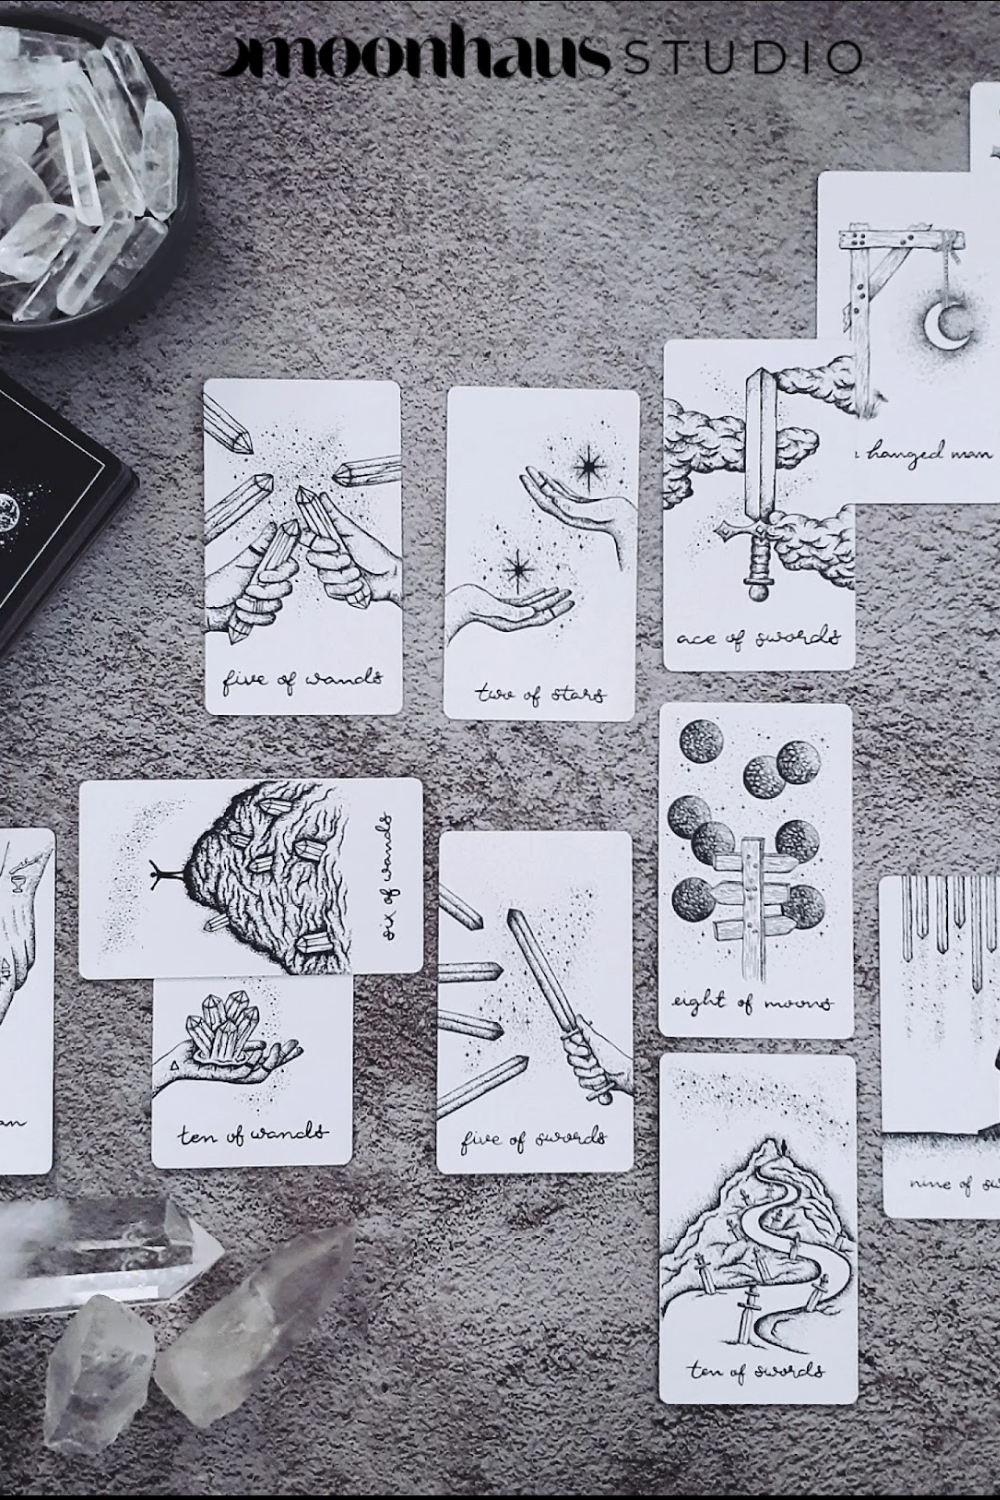 tarot cards deck: aesthetic beginner decks for learning tarot reading & spreads | white & black tarot with holographic edges, minimalist card art with tarot guide booklet